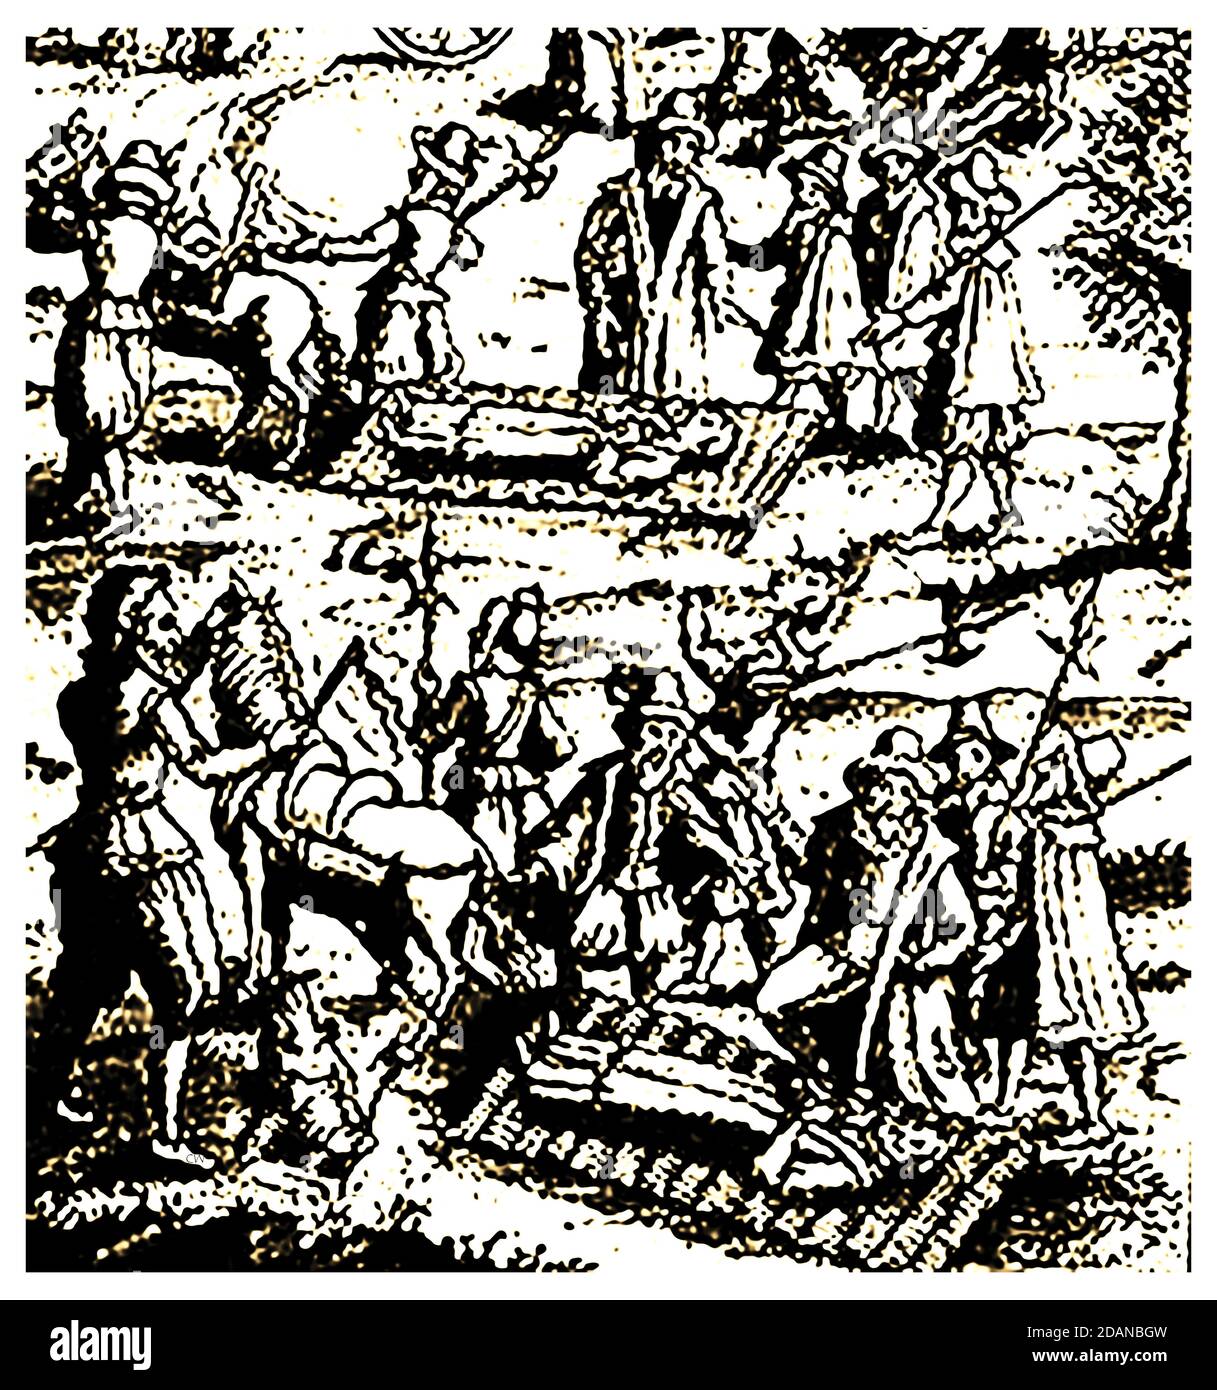 A medieval English  engraving showing convicted criminals being drawn through the streets to the gallows on woven wicker hurdles, pulled by horses Stock Photo